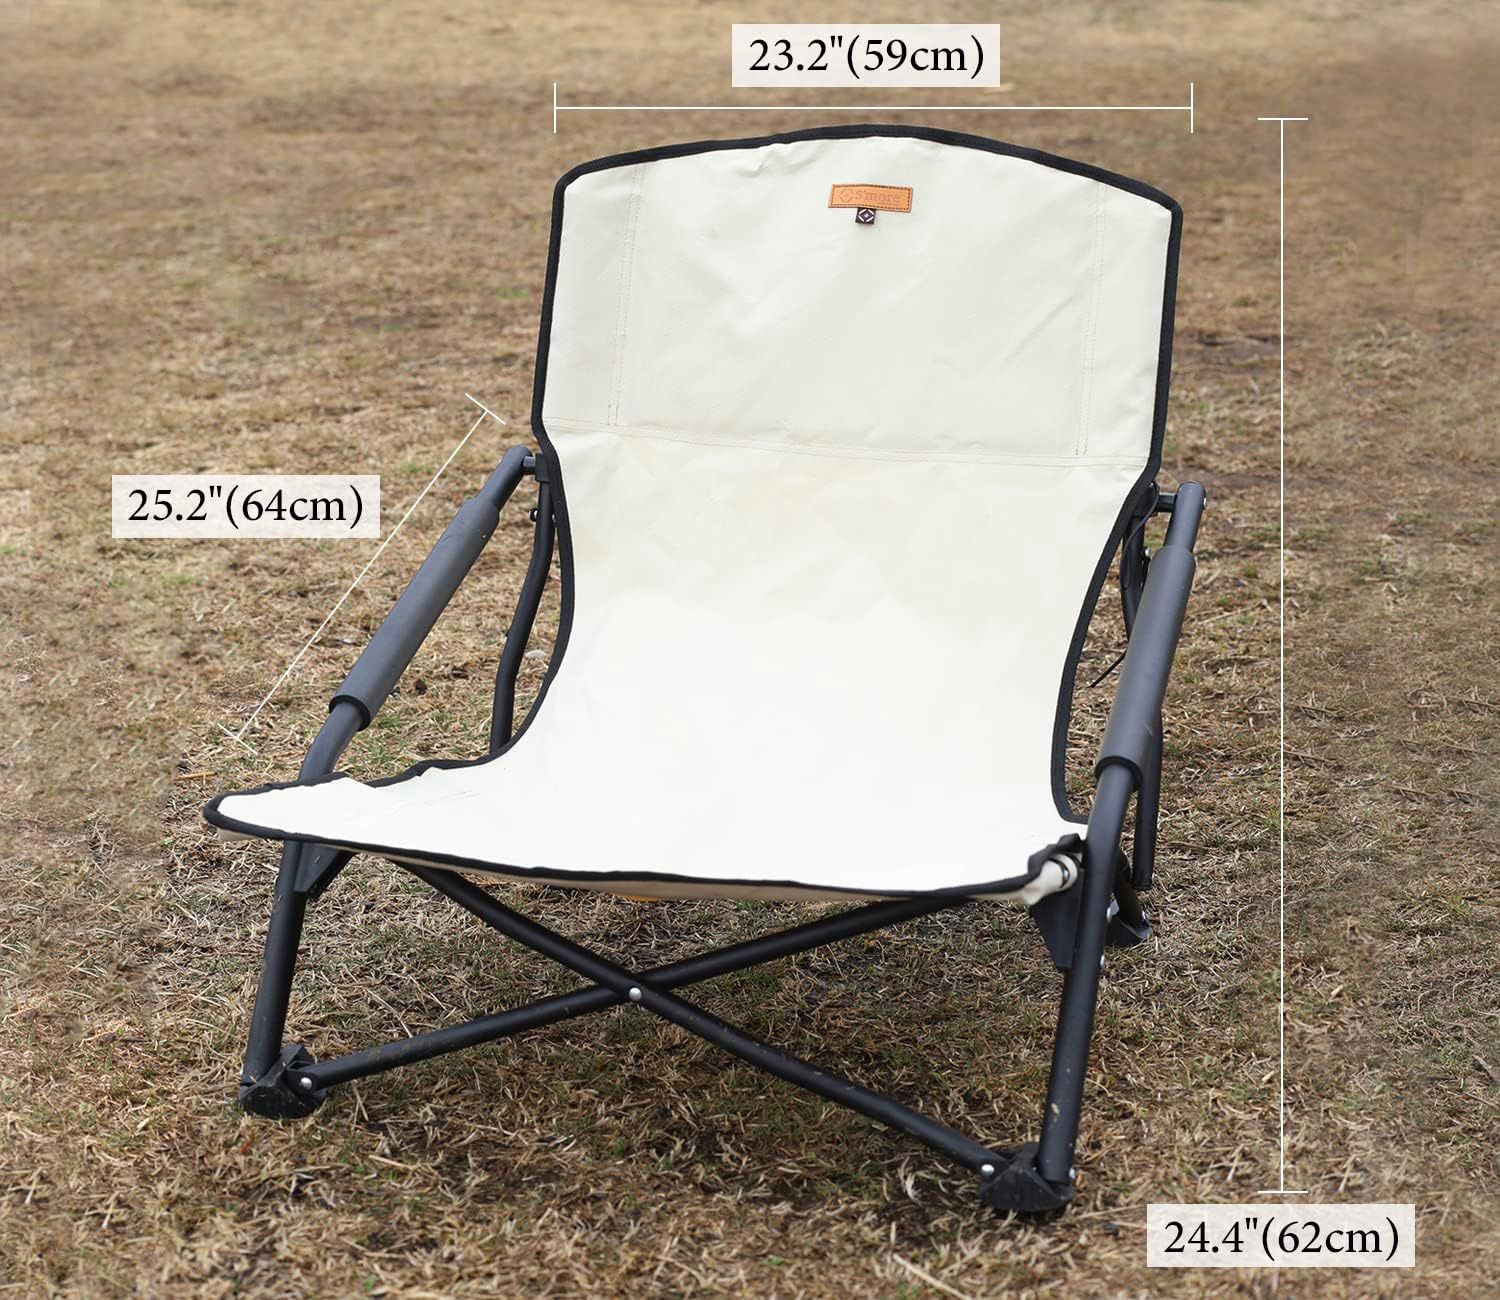 Brand New Low Beach Chairs with Carry Bag, Camping Chair with Padded Armrests, Lightweight Folding Chairs for Camping, Hiking, Backpacking, Picnicking